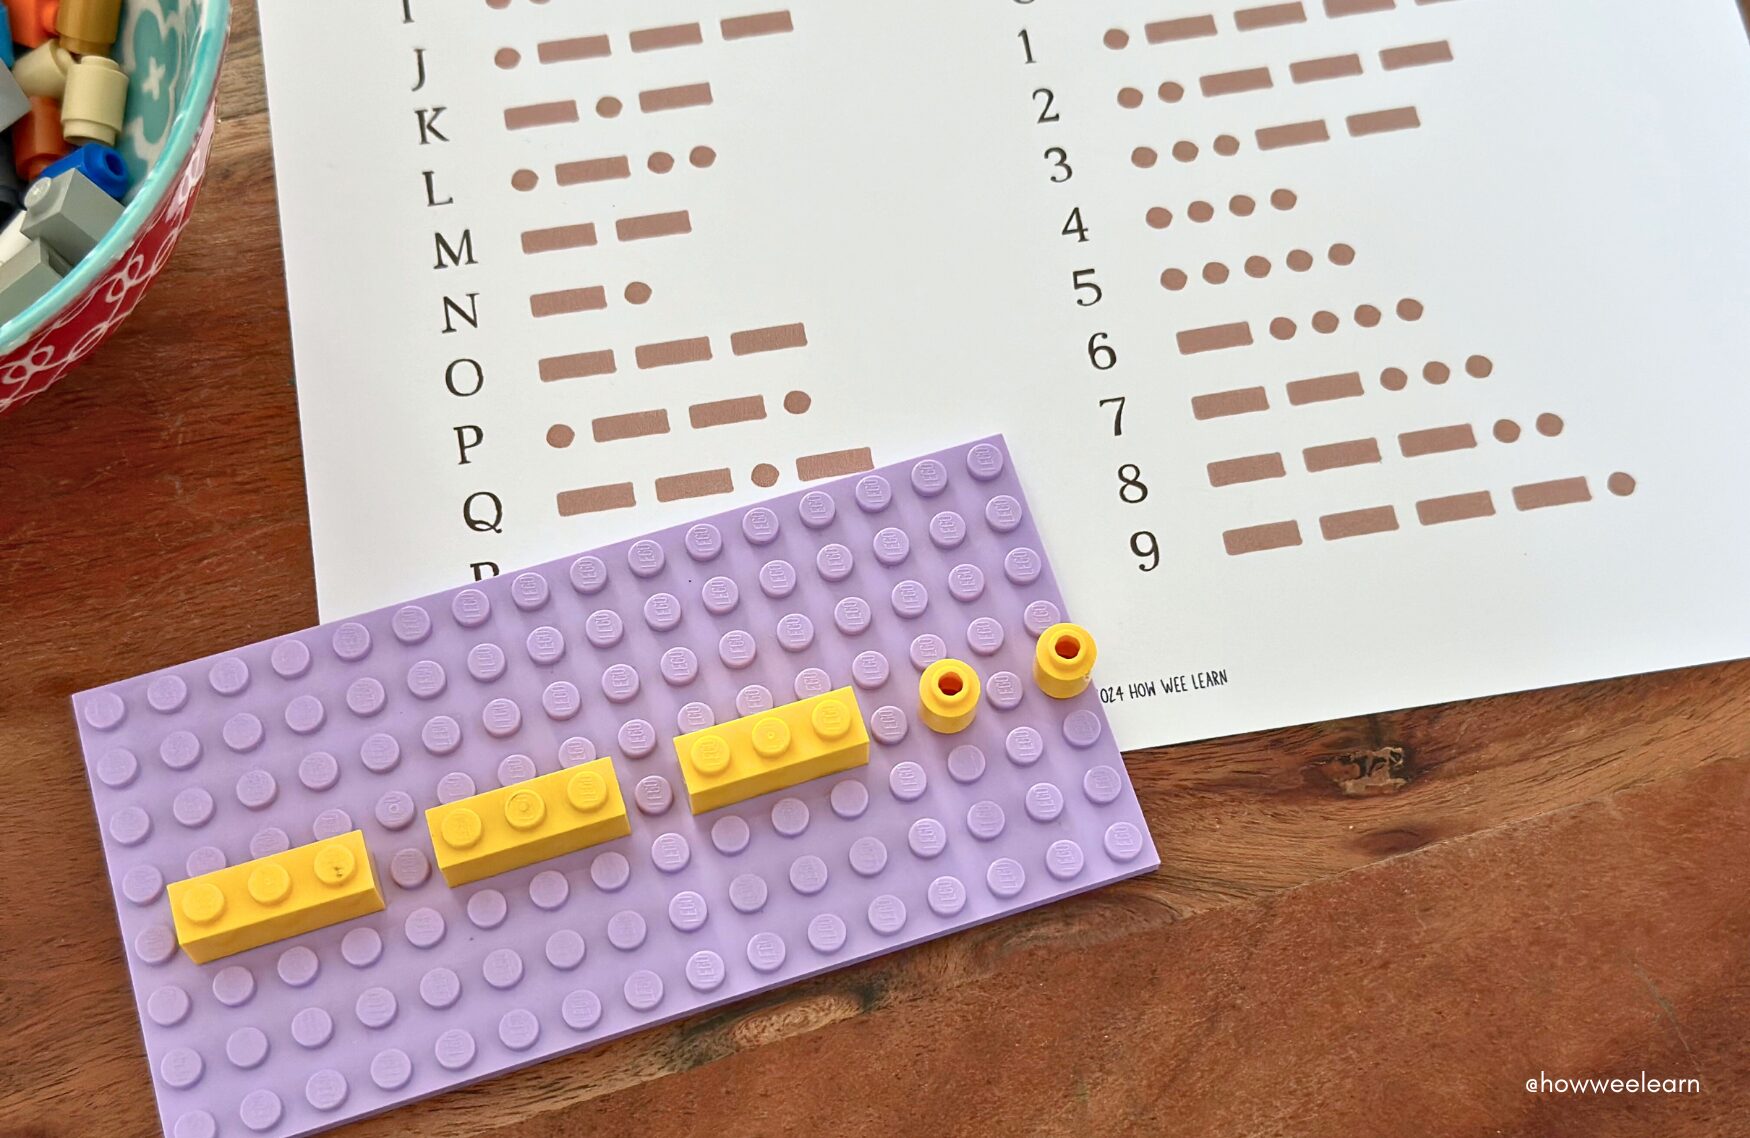 International morse code printable with lego bricks showing the number 8 in morse code